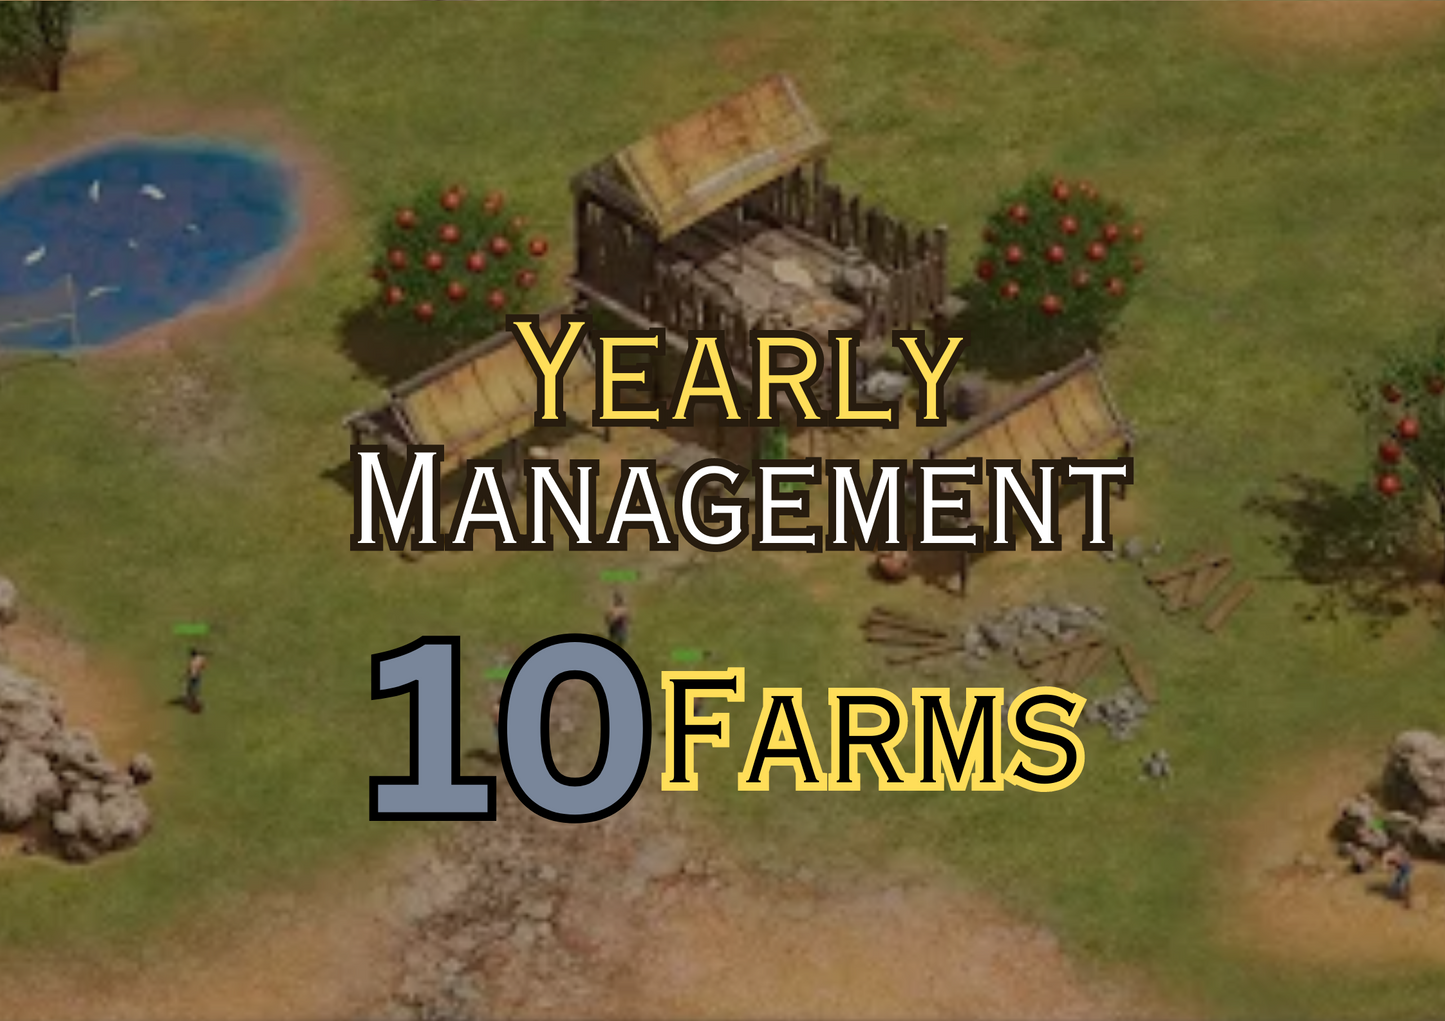 Yearly Management for 10 farms